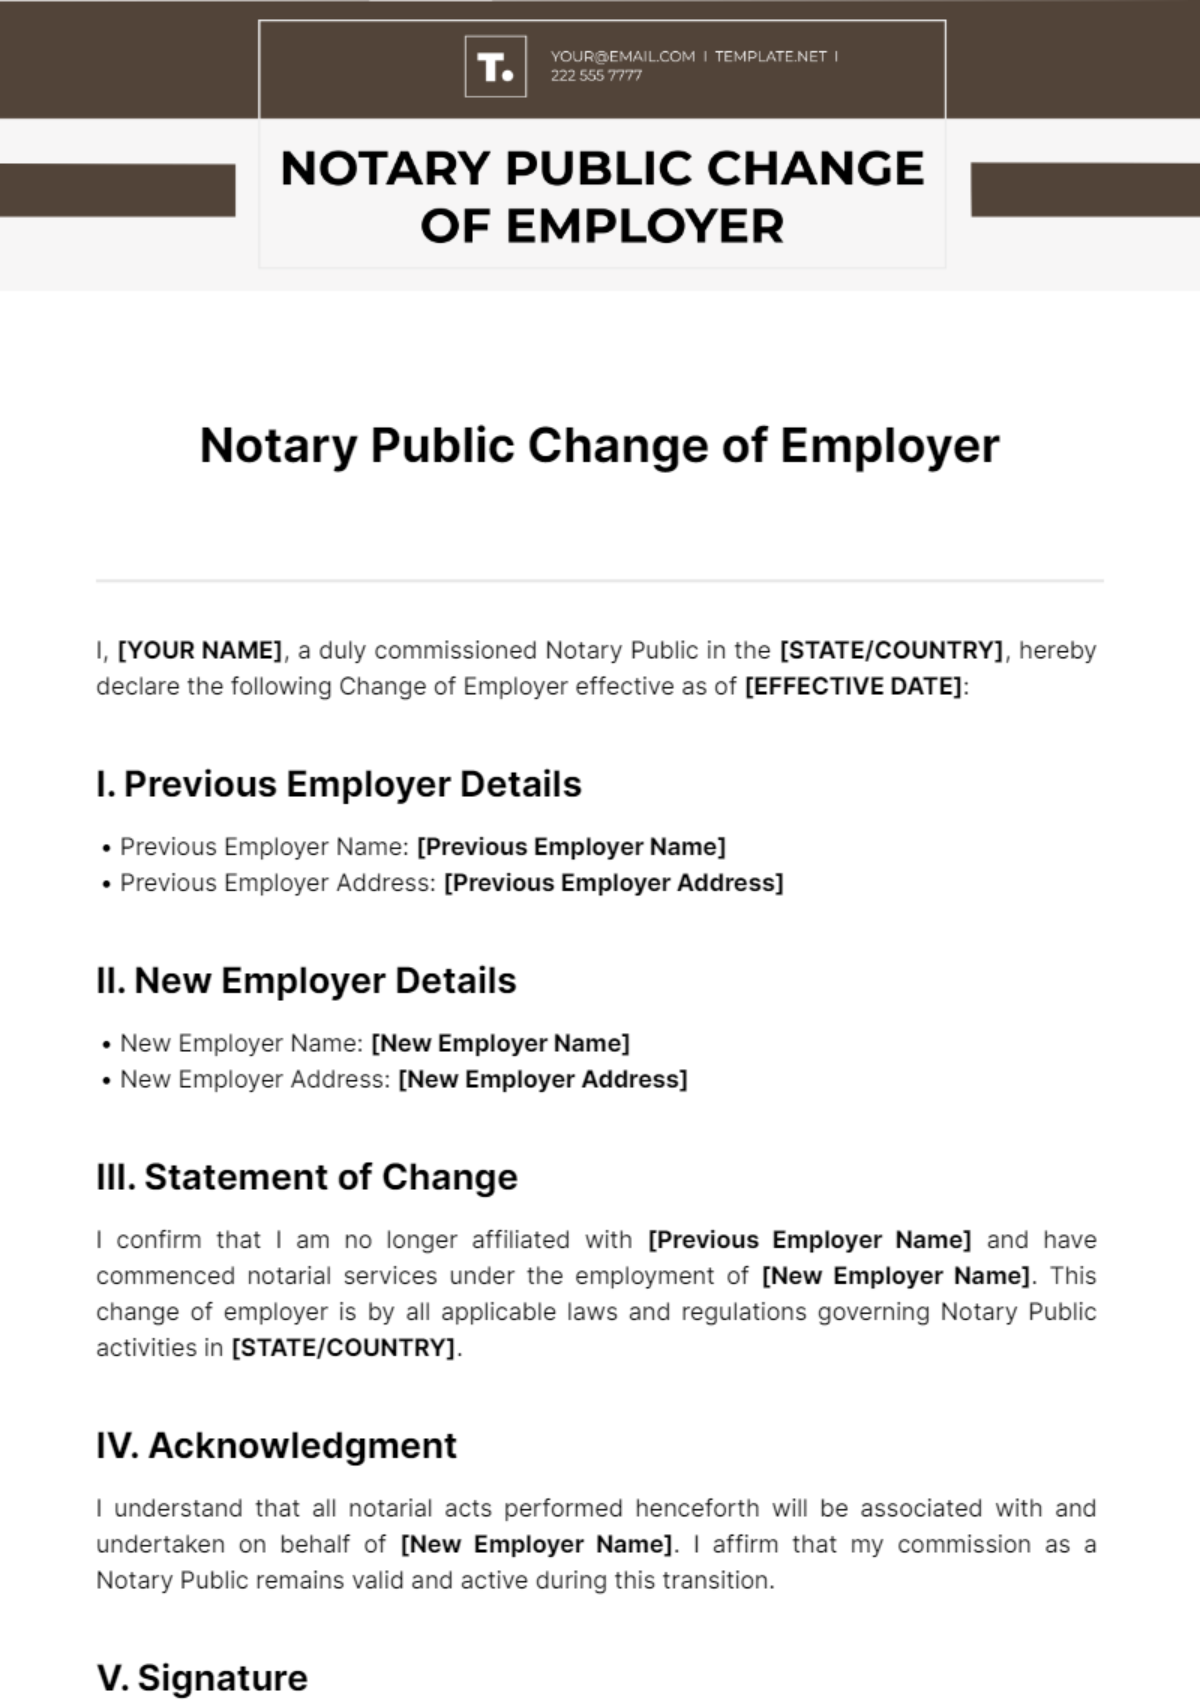 Notary Public Change Of Employer Template